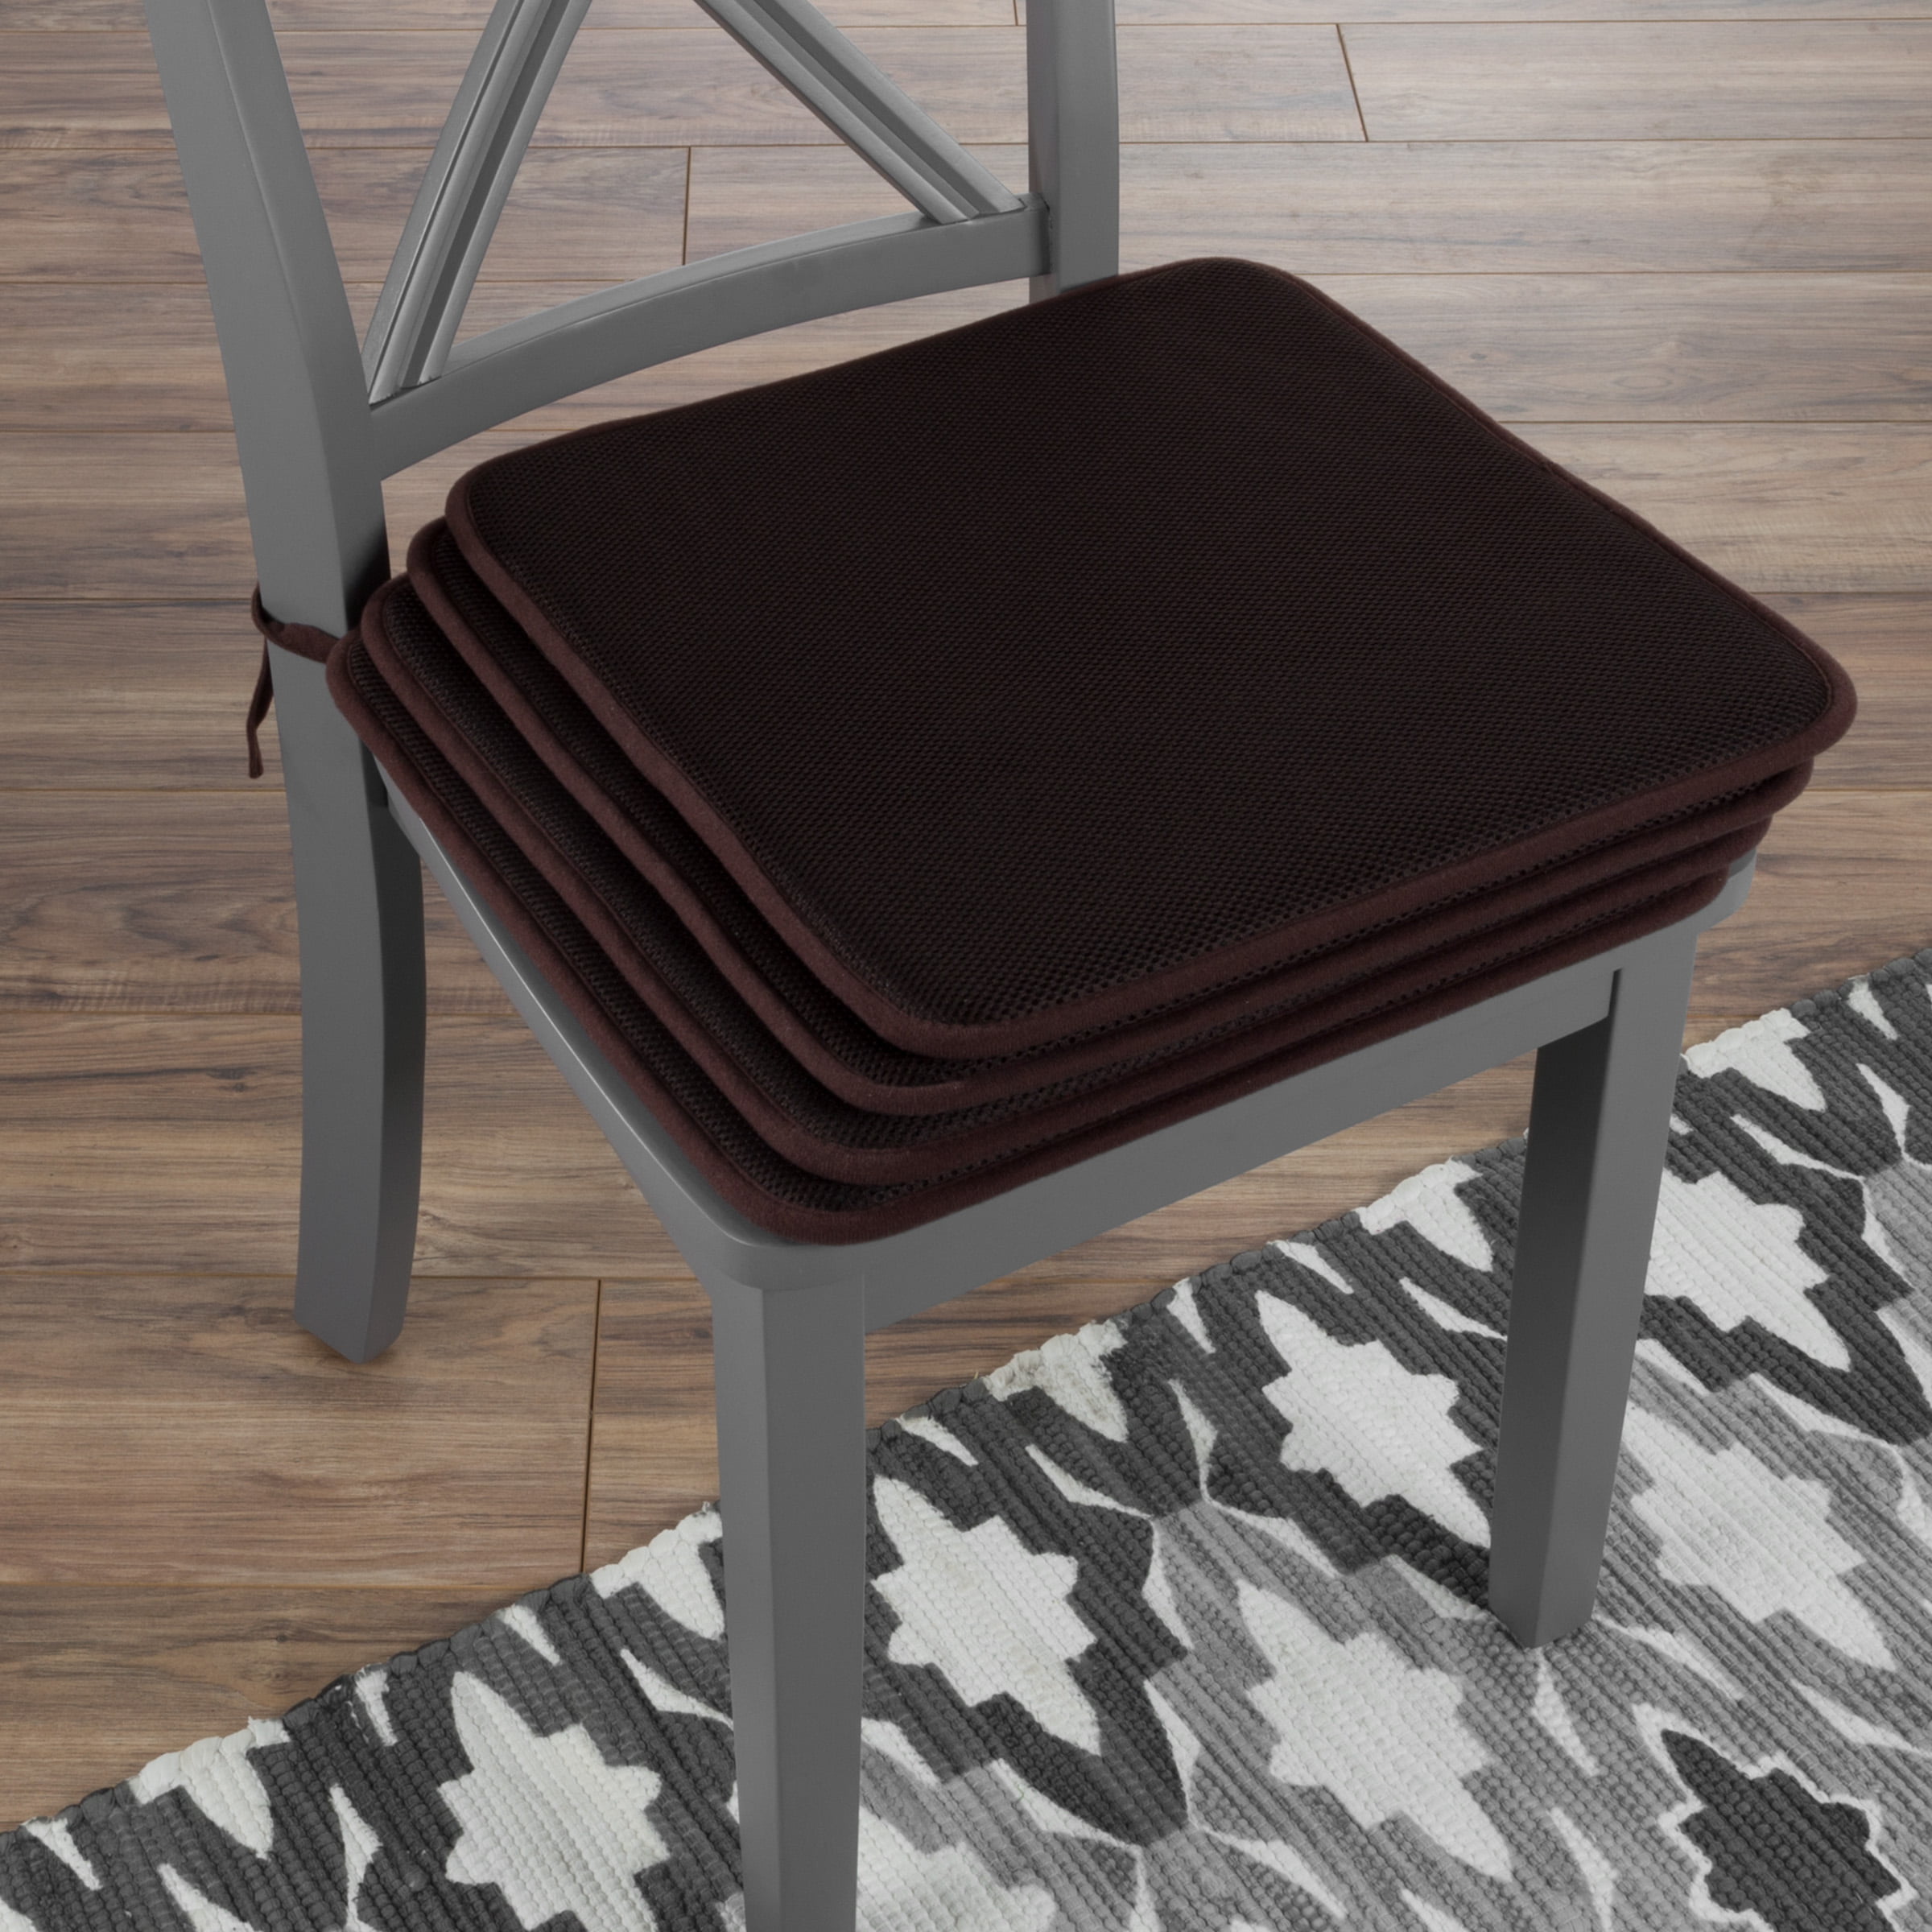 chair pads dining room chairs